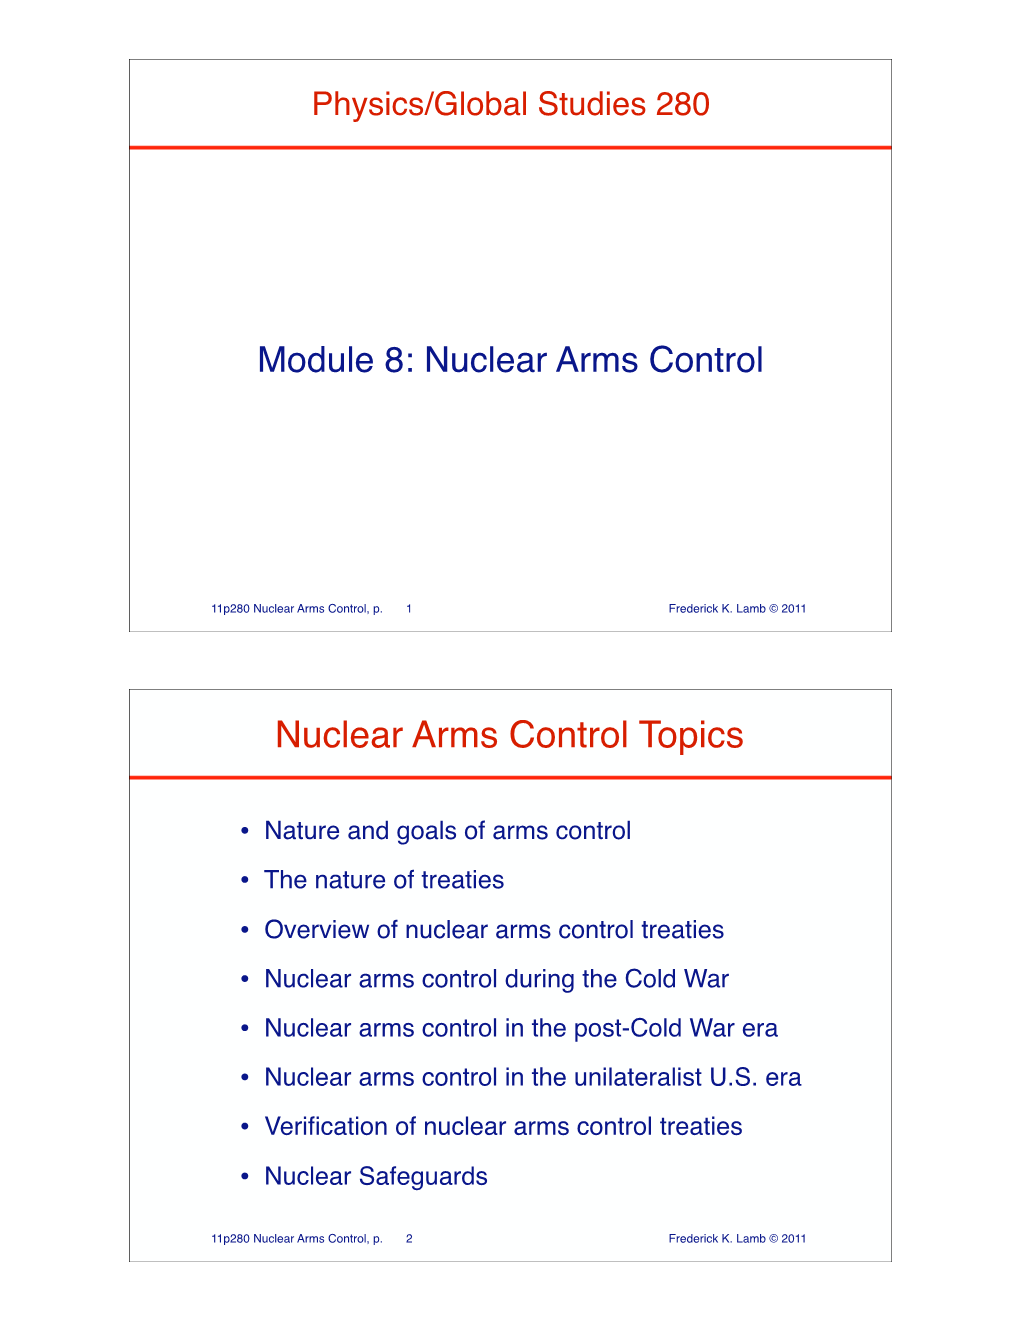 Nuclear Arms Control Topics